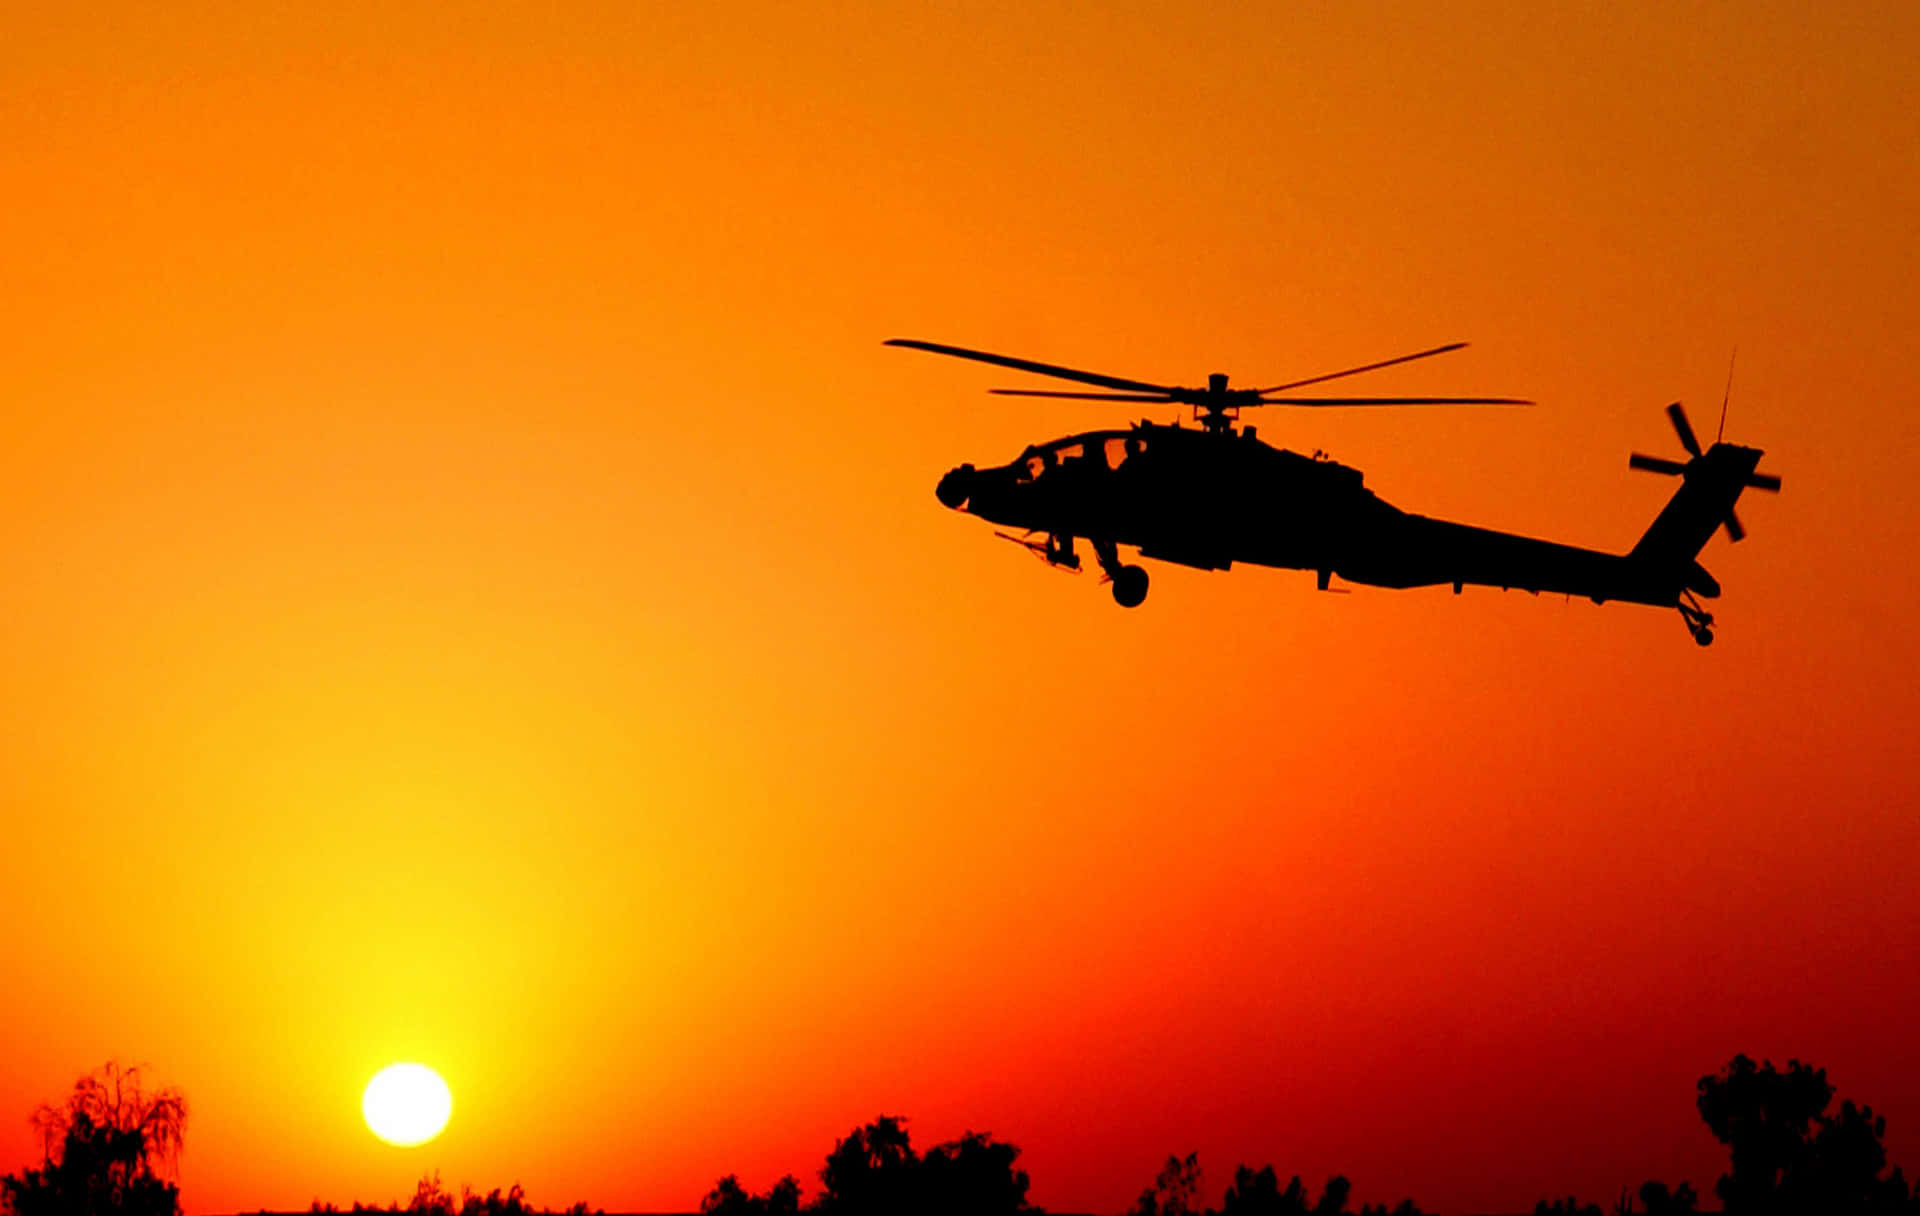 A helicopter takes flight in a sunset sky